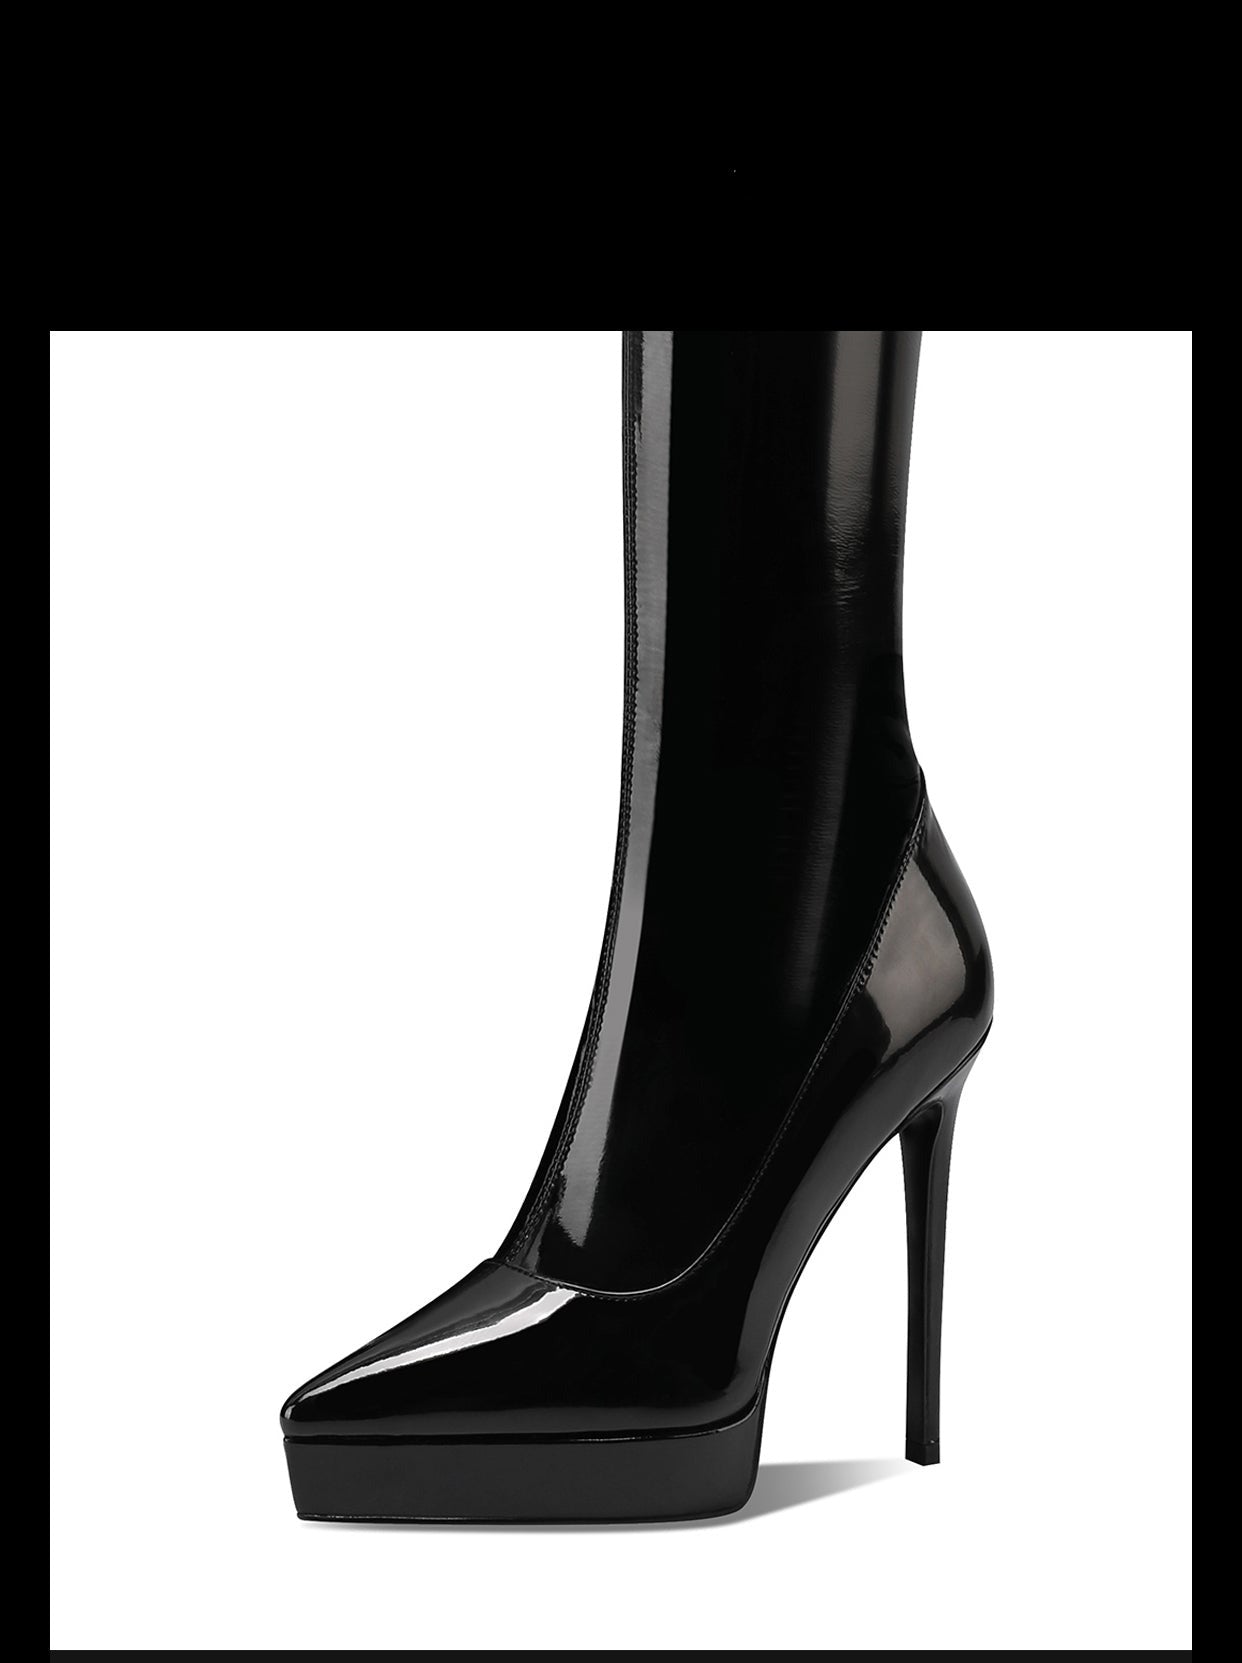 Fab-fei patent leather black over-the-knee autumn/winter waterproof platform pointed toe sexy stiletto boots